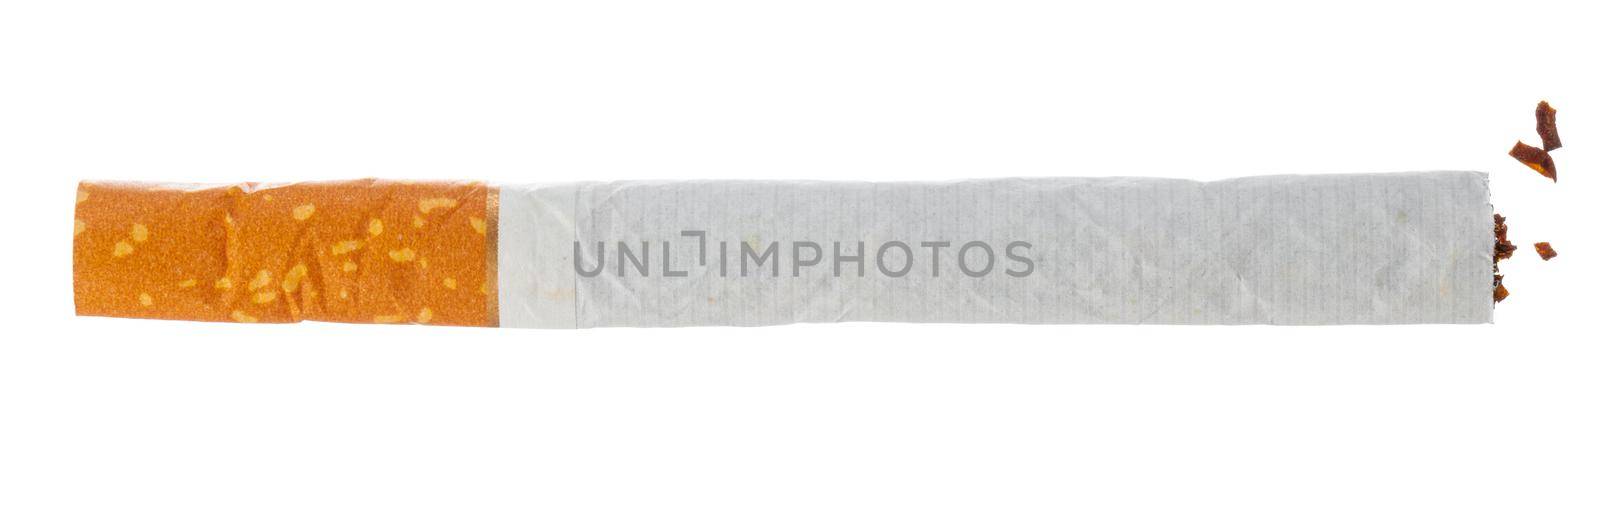 Broken cigarette isolated on white background close up by Fabrikasimf